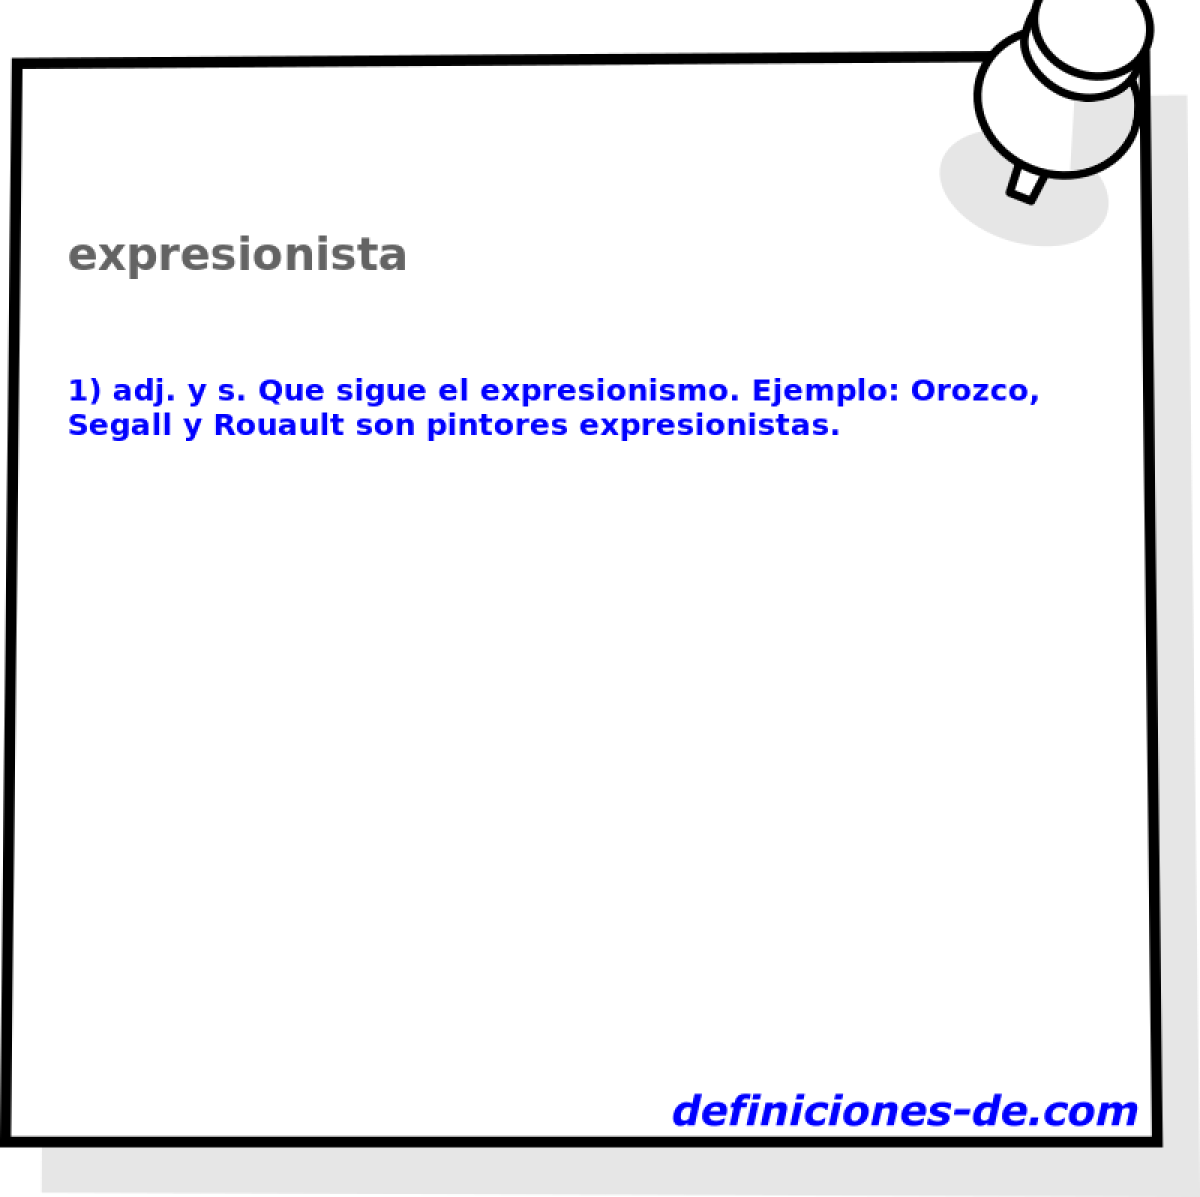 expresionista 